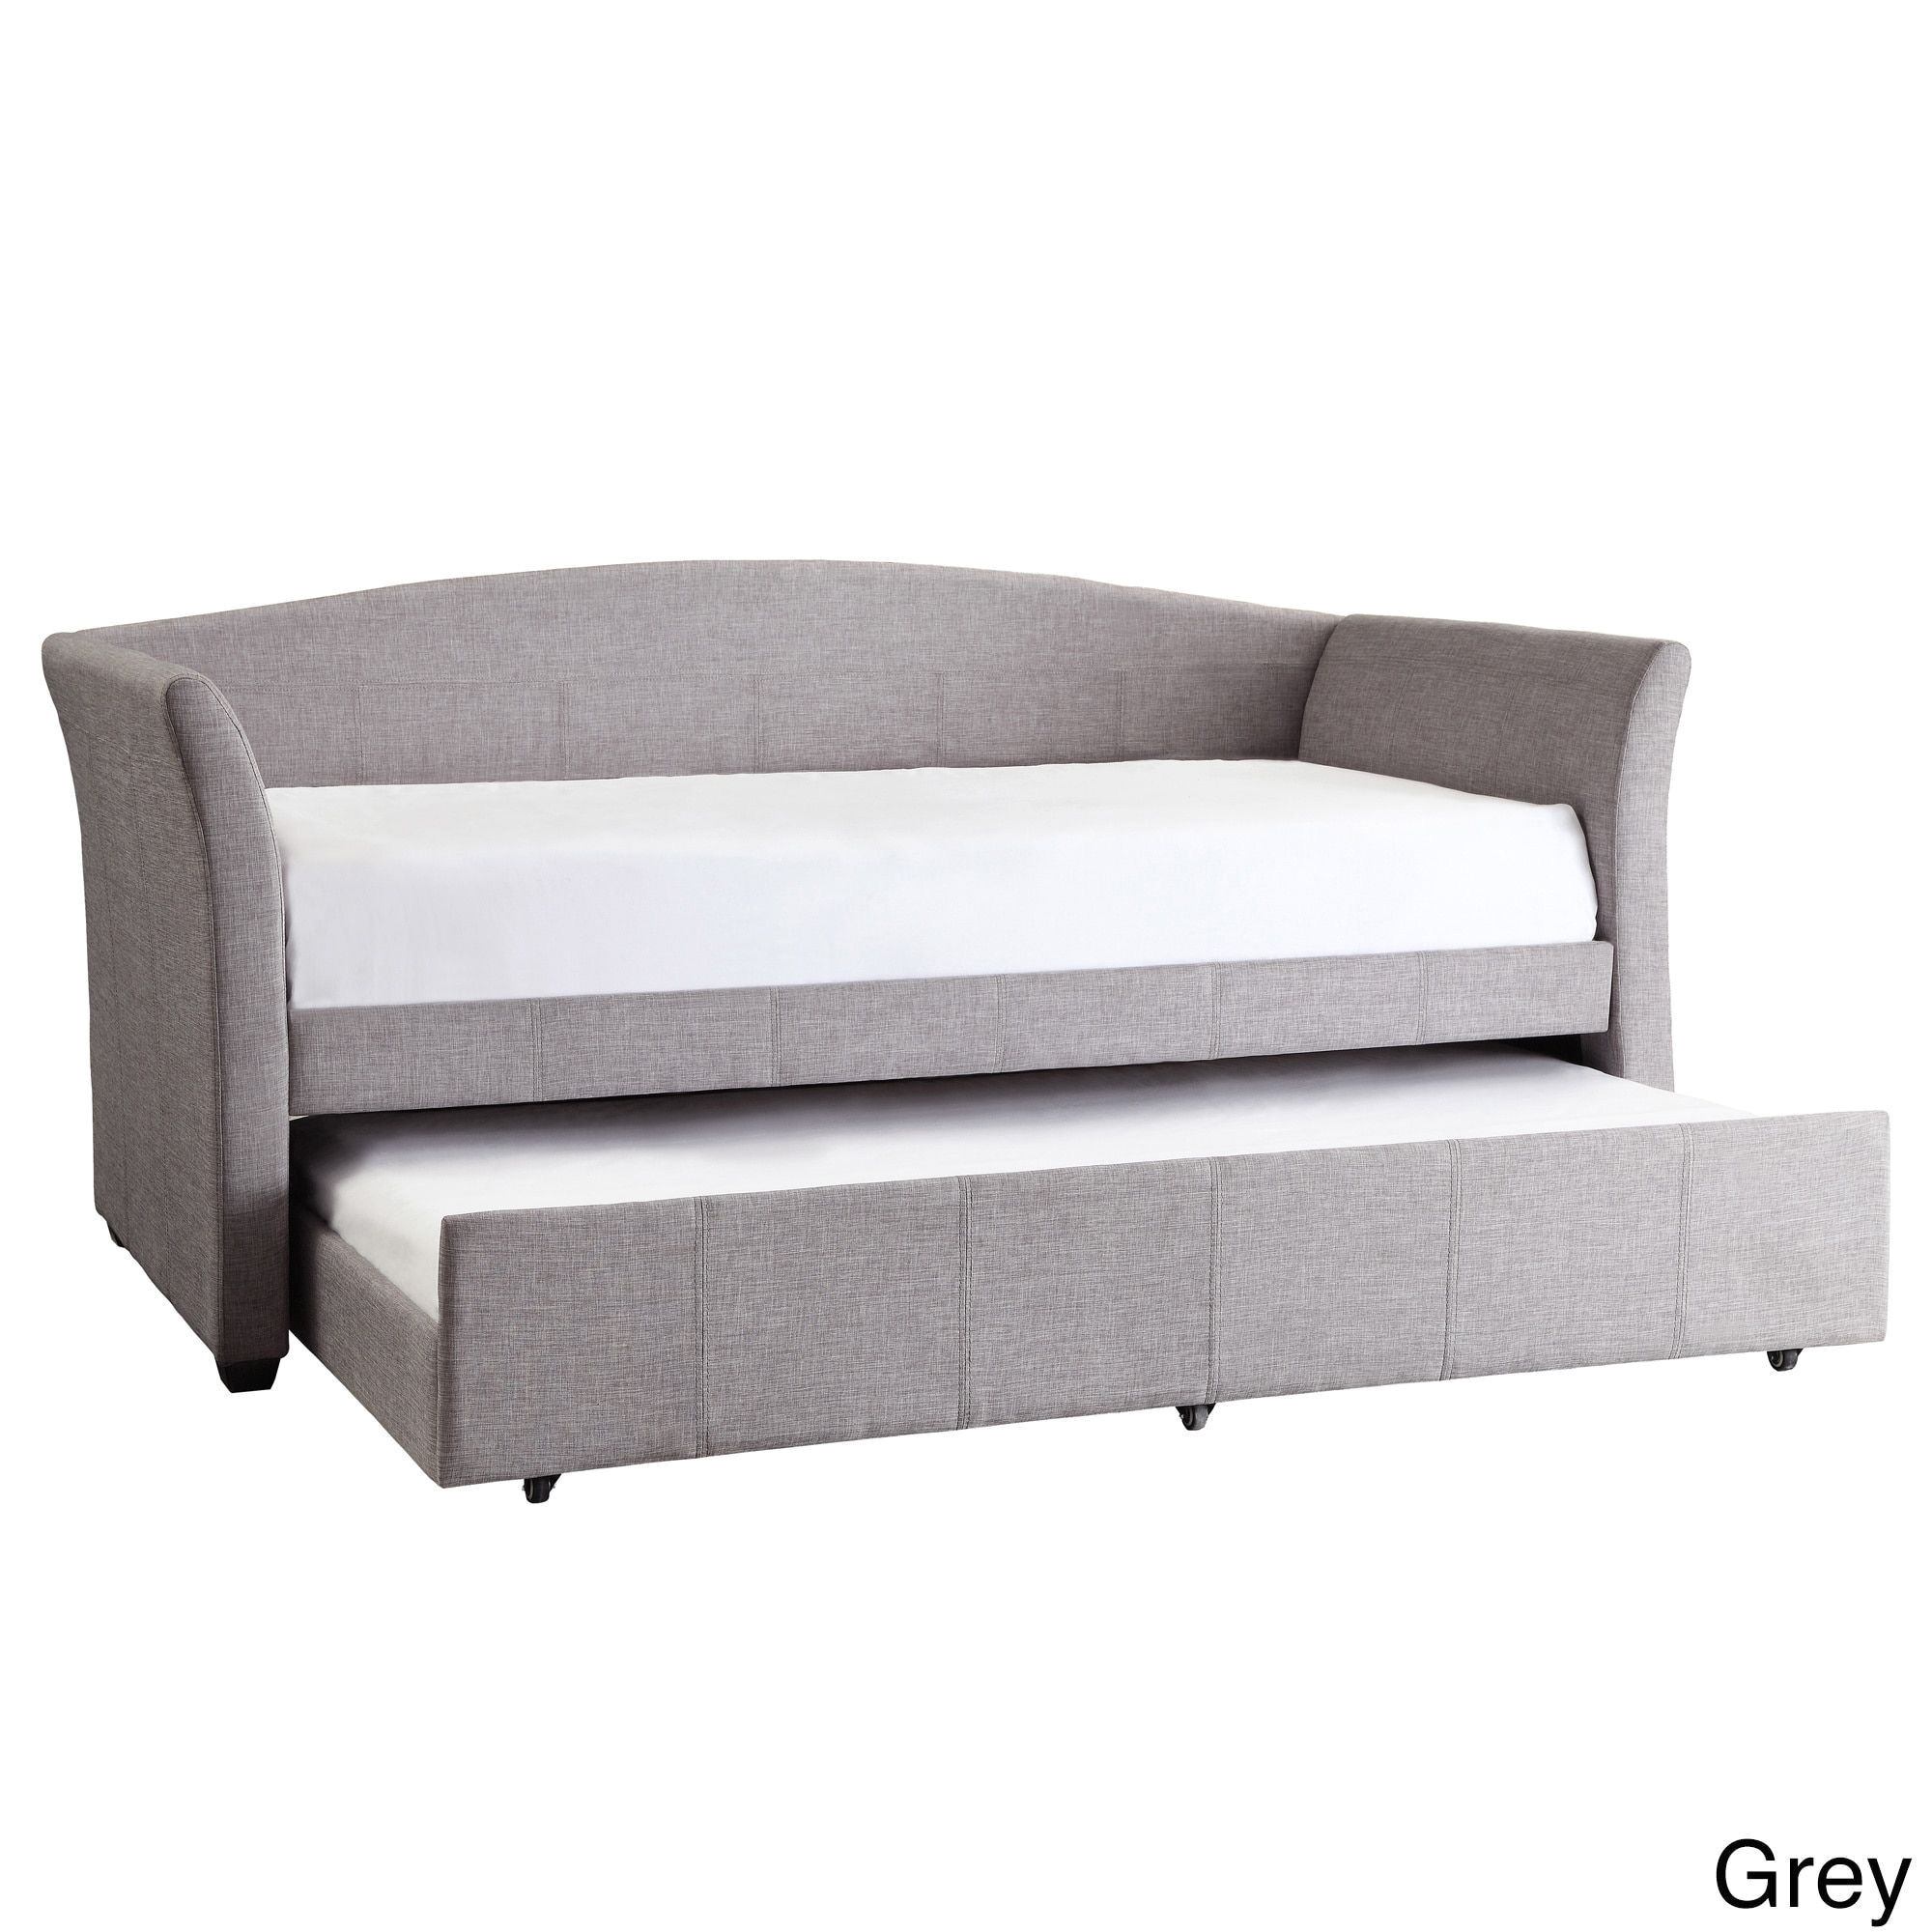 deco linen rolled arm daybed and trundle by inspire q grey linen without trundle size twin xl